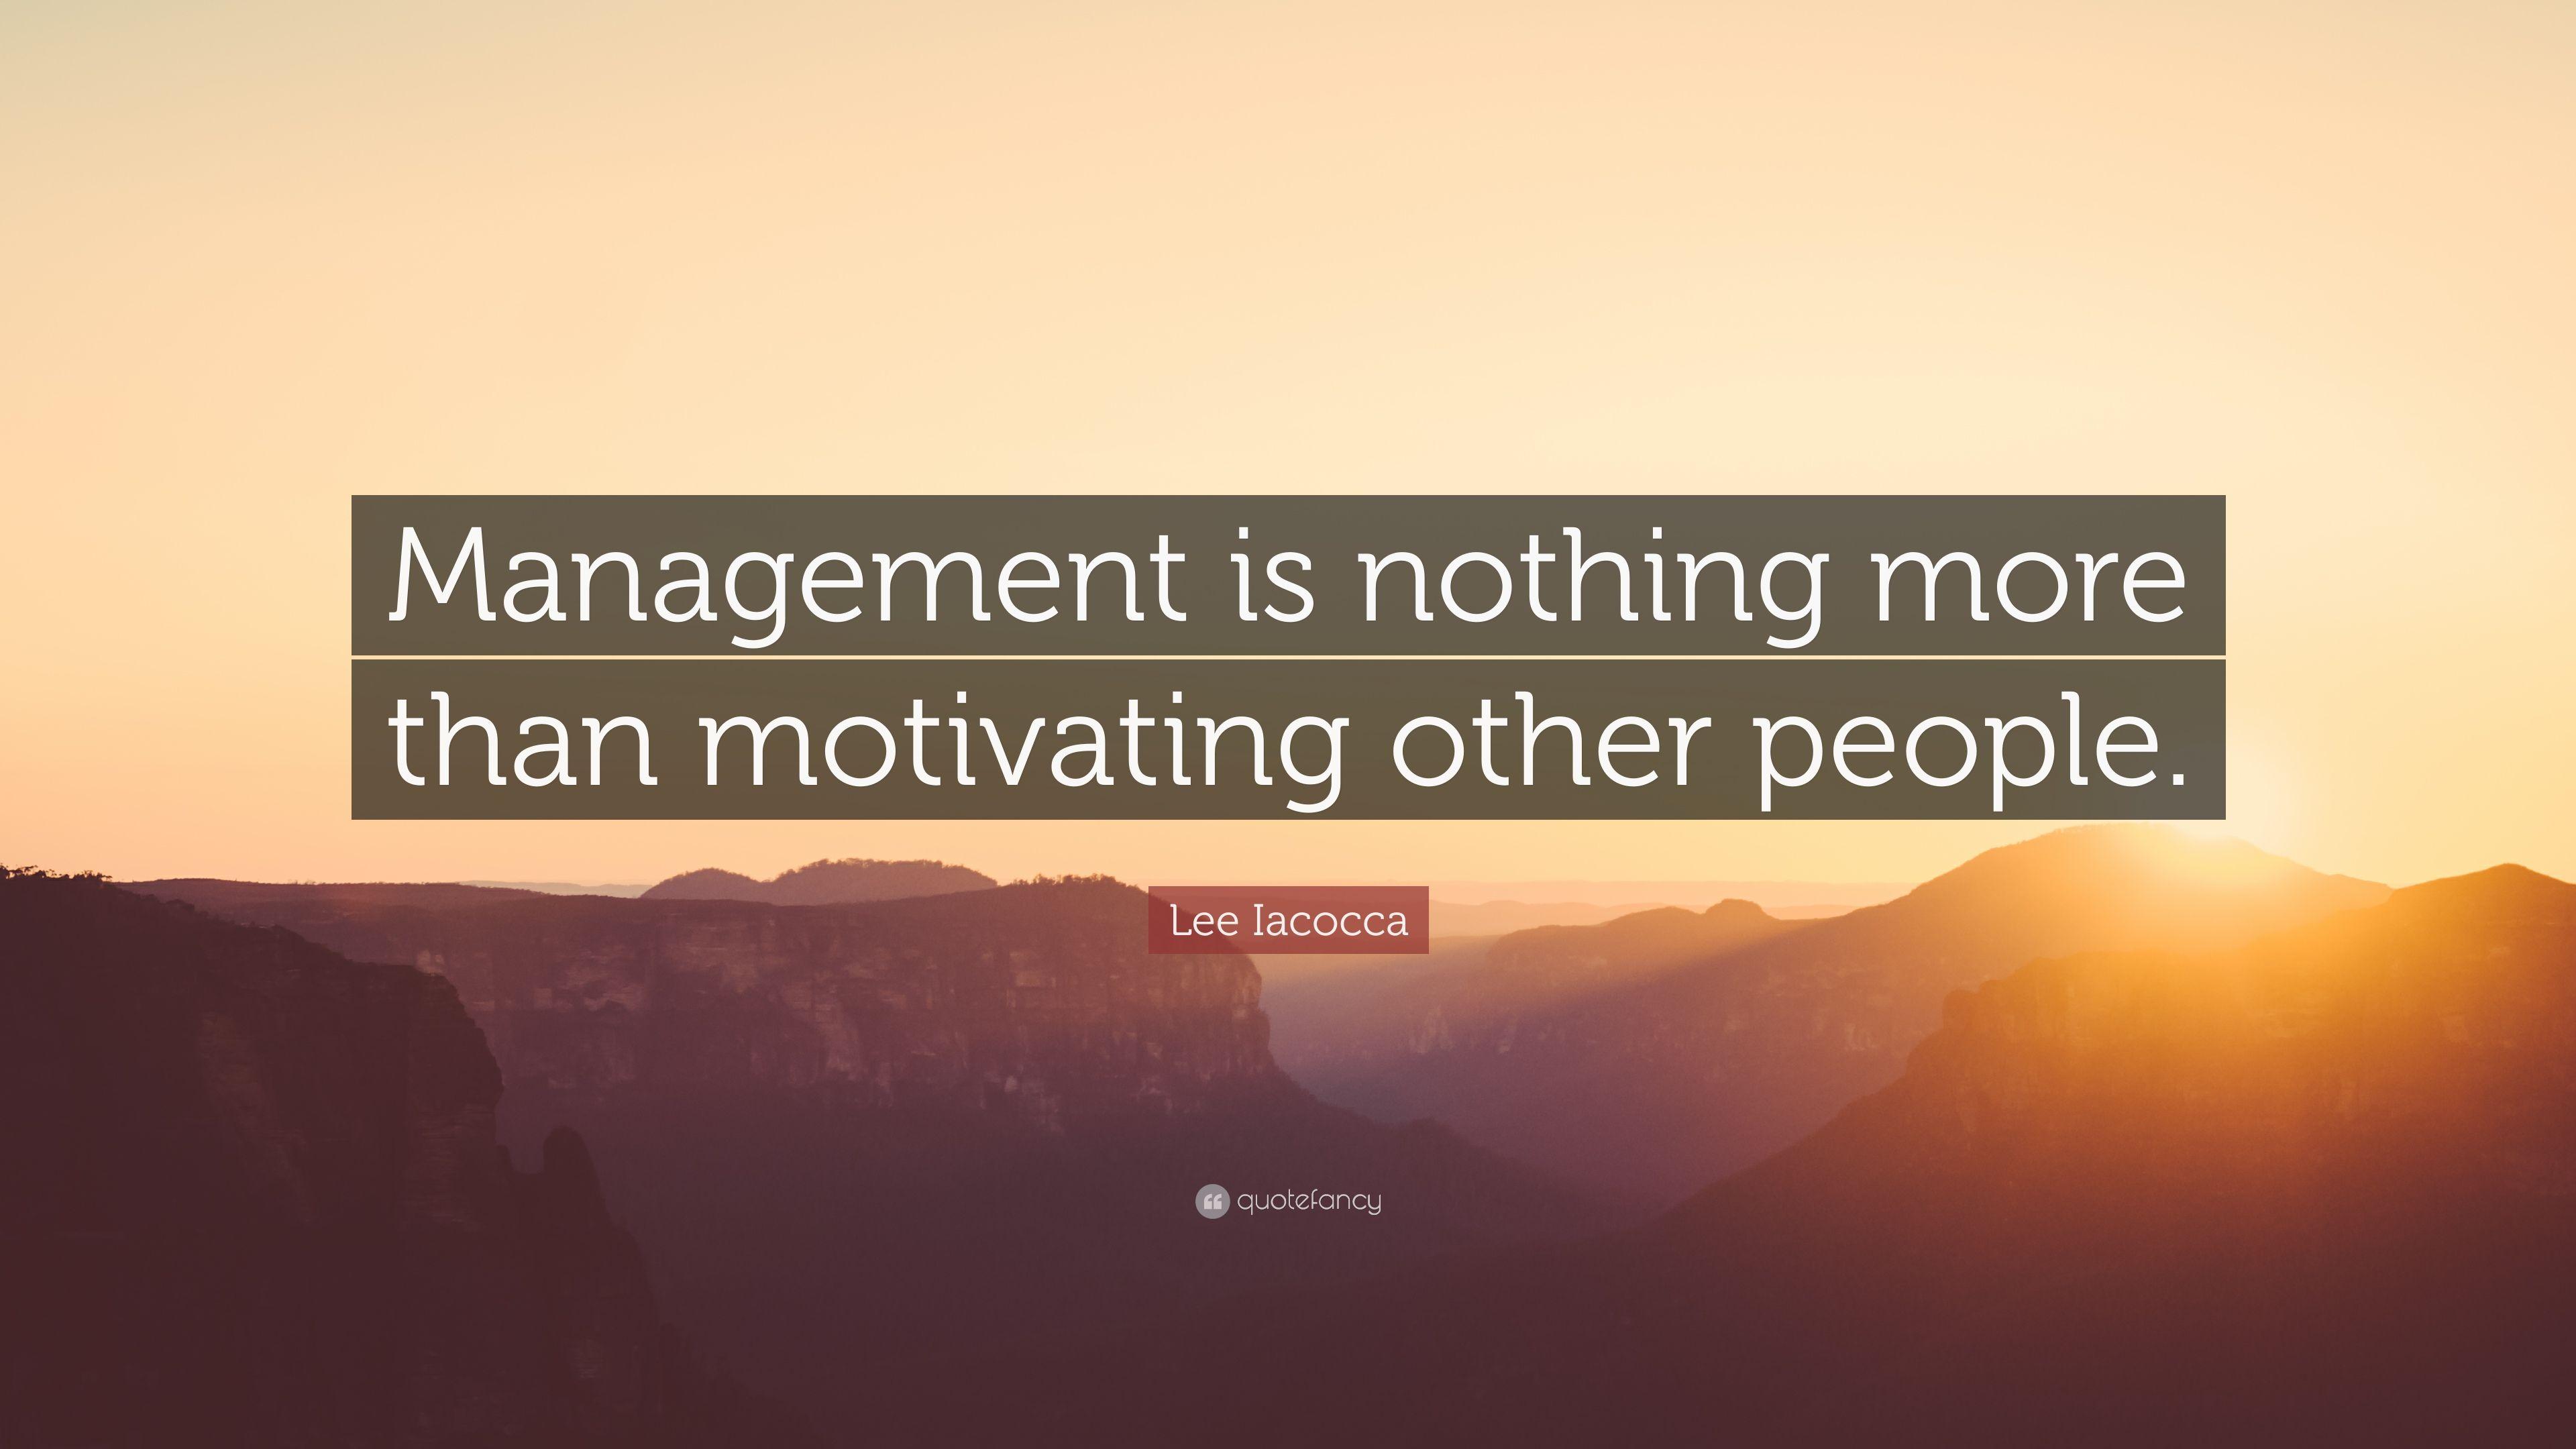 Lee Iacocca Quote: “Management is nothing more than motivating